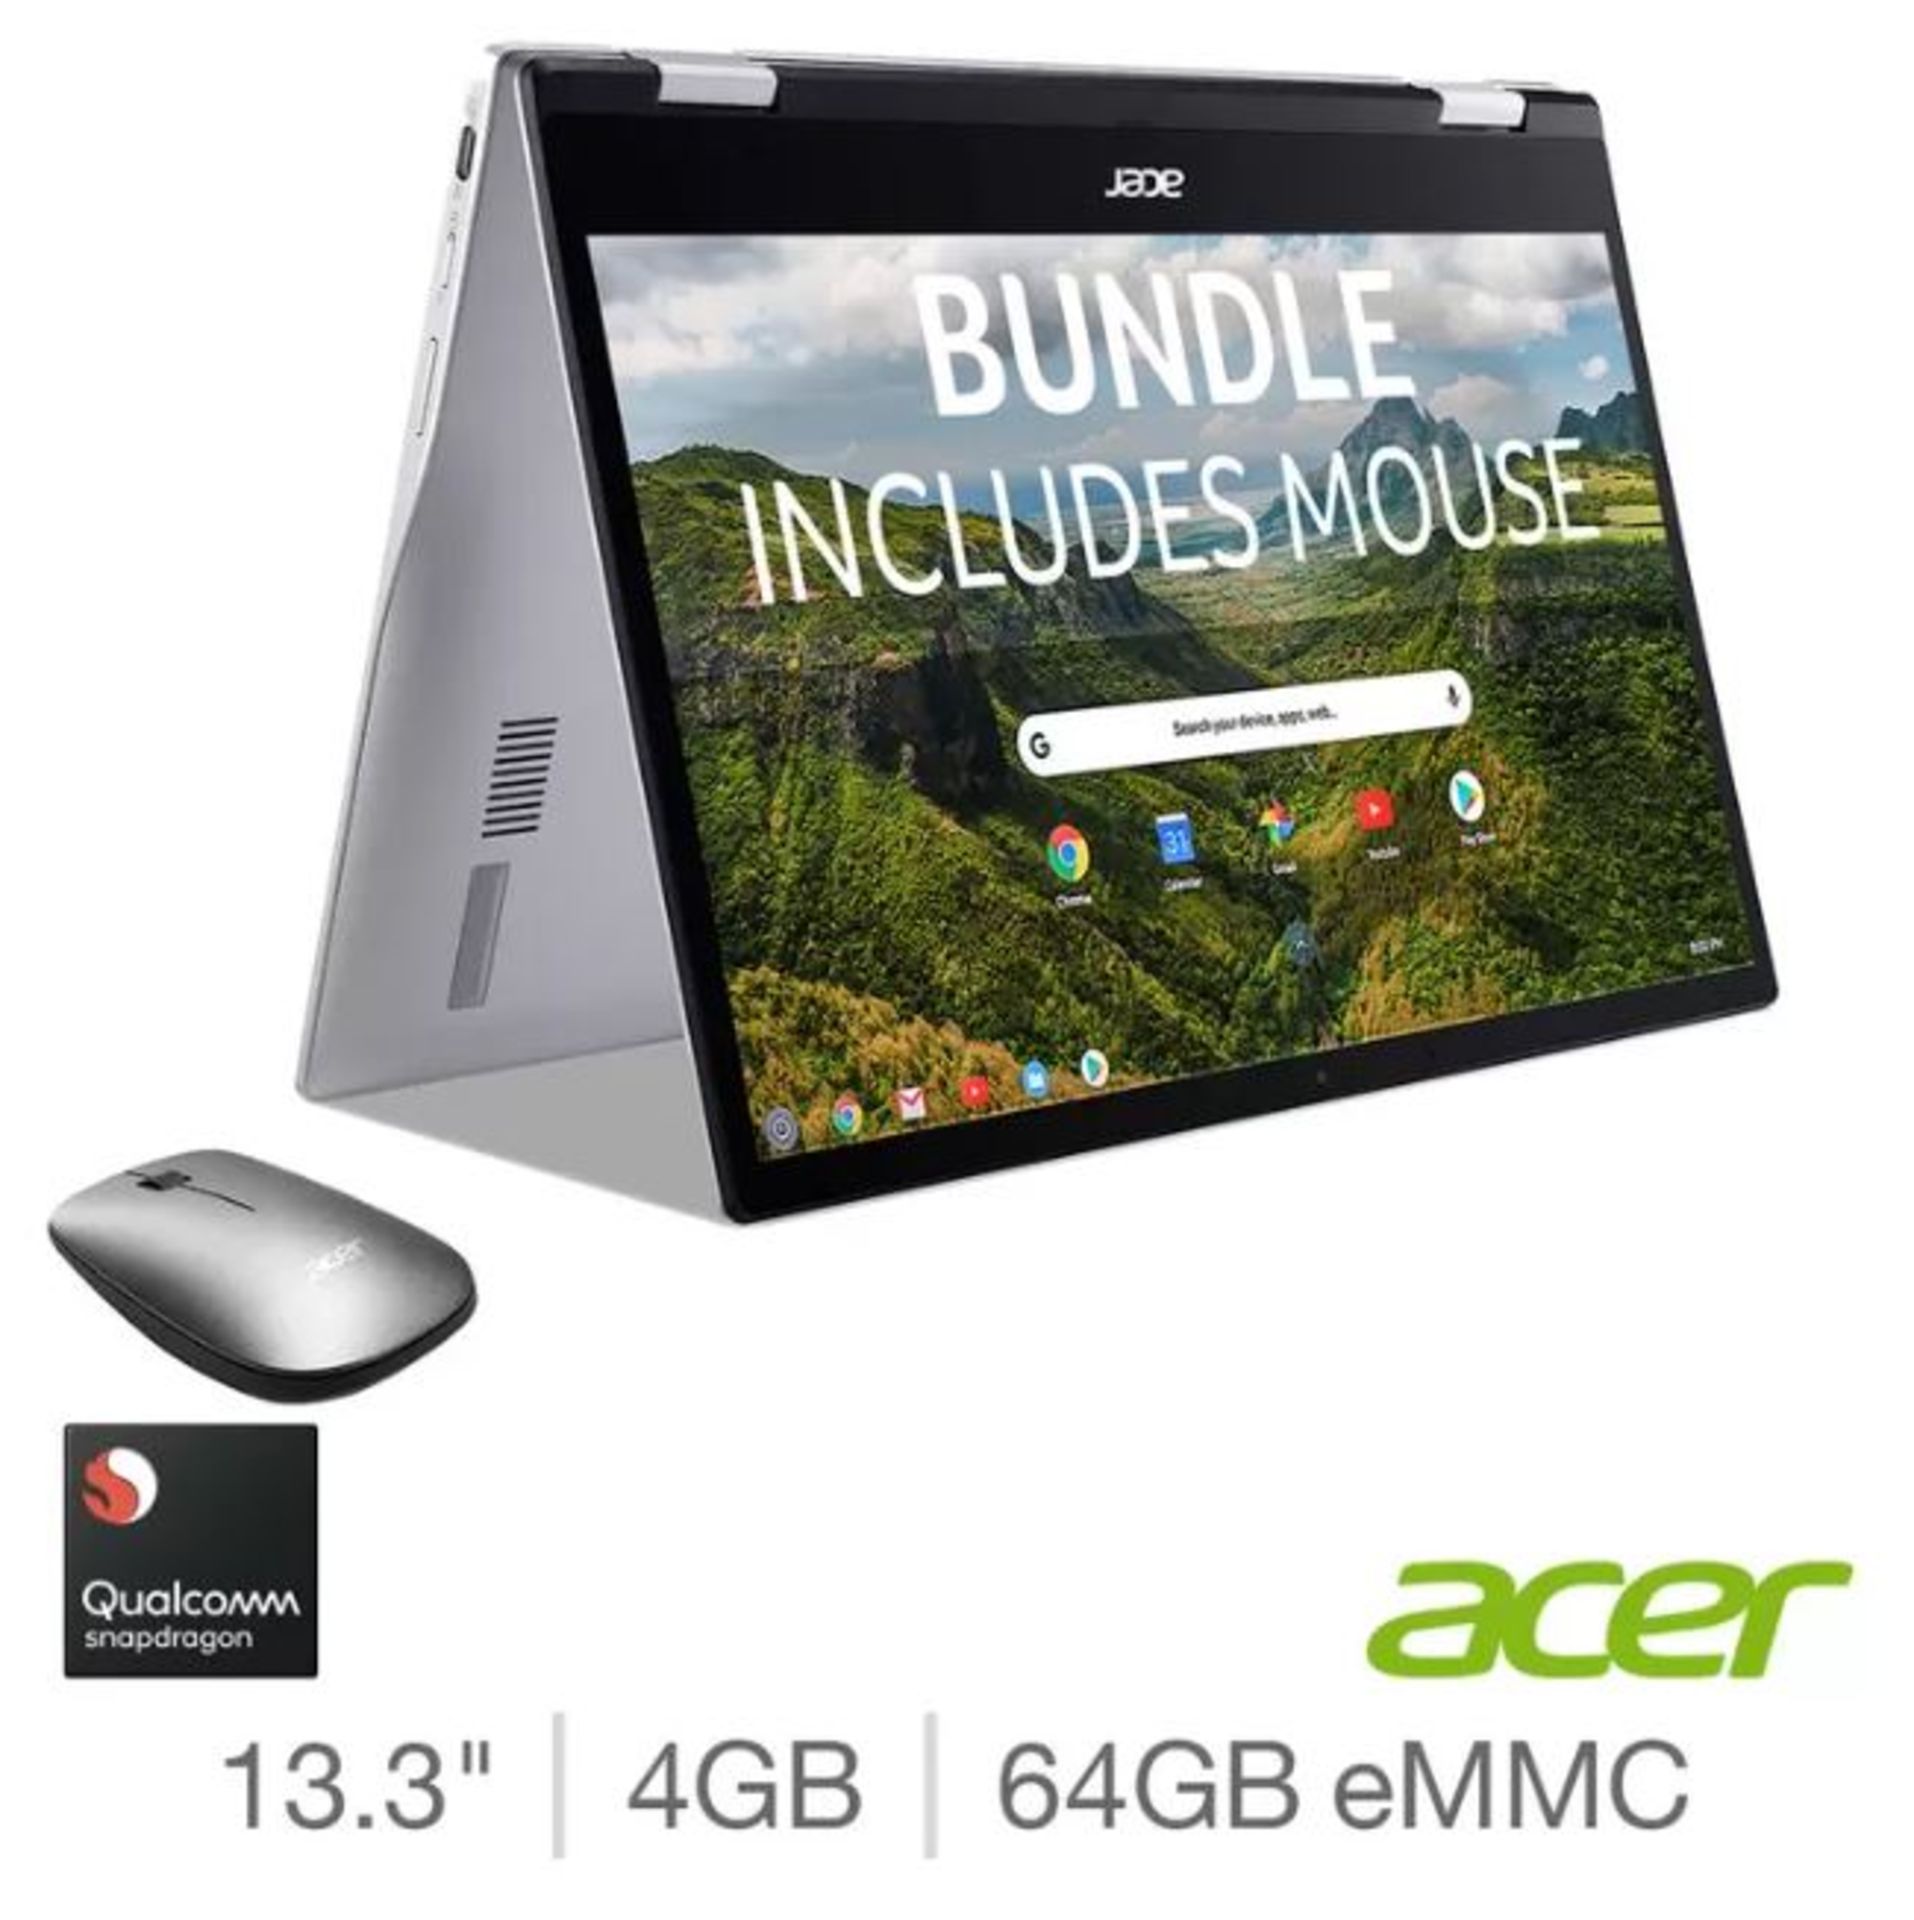 1 BOXED ACER 513, QUALCOMM SNAPDRAGON SC7180, 4GB RAM, 64GB EMMC, 13.3 INCH CONVERTIBLE 2 IN 1